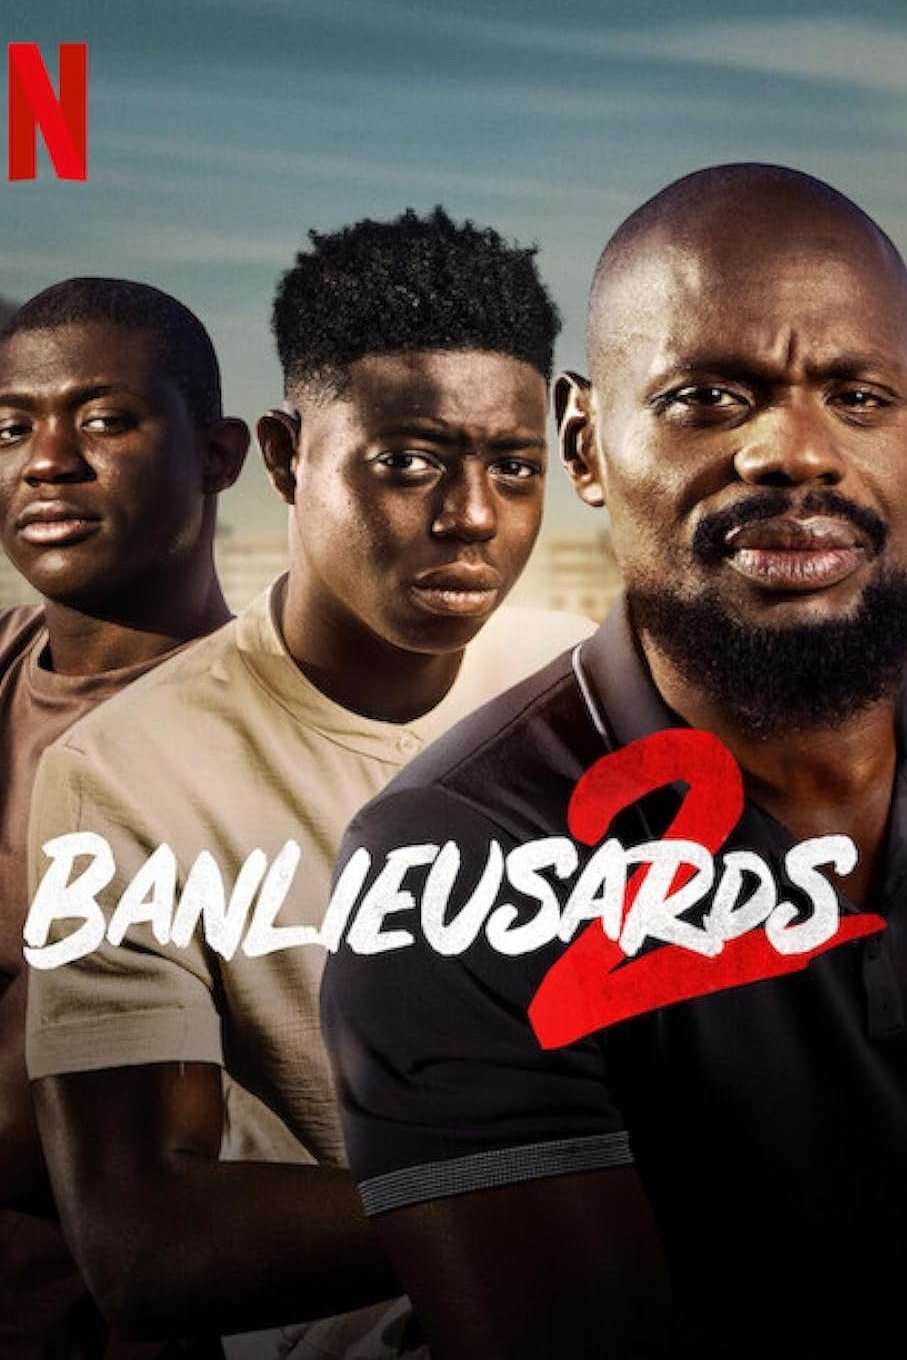 Poster of the movie Banlieusards 2